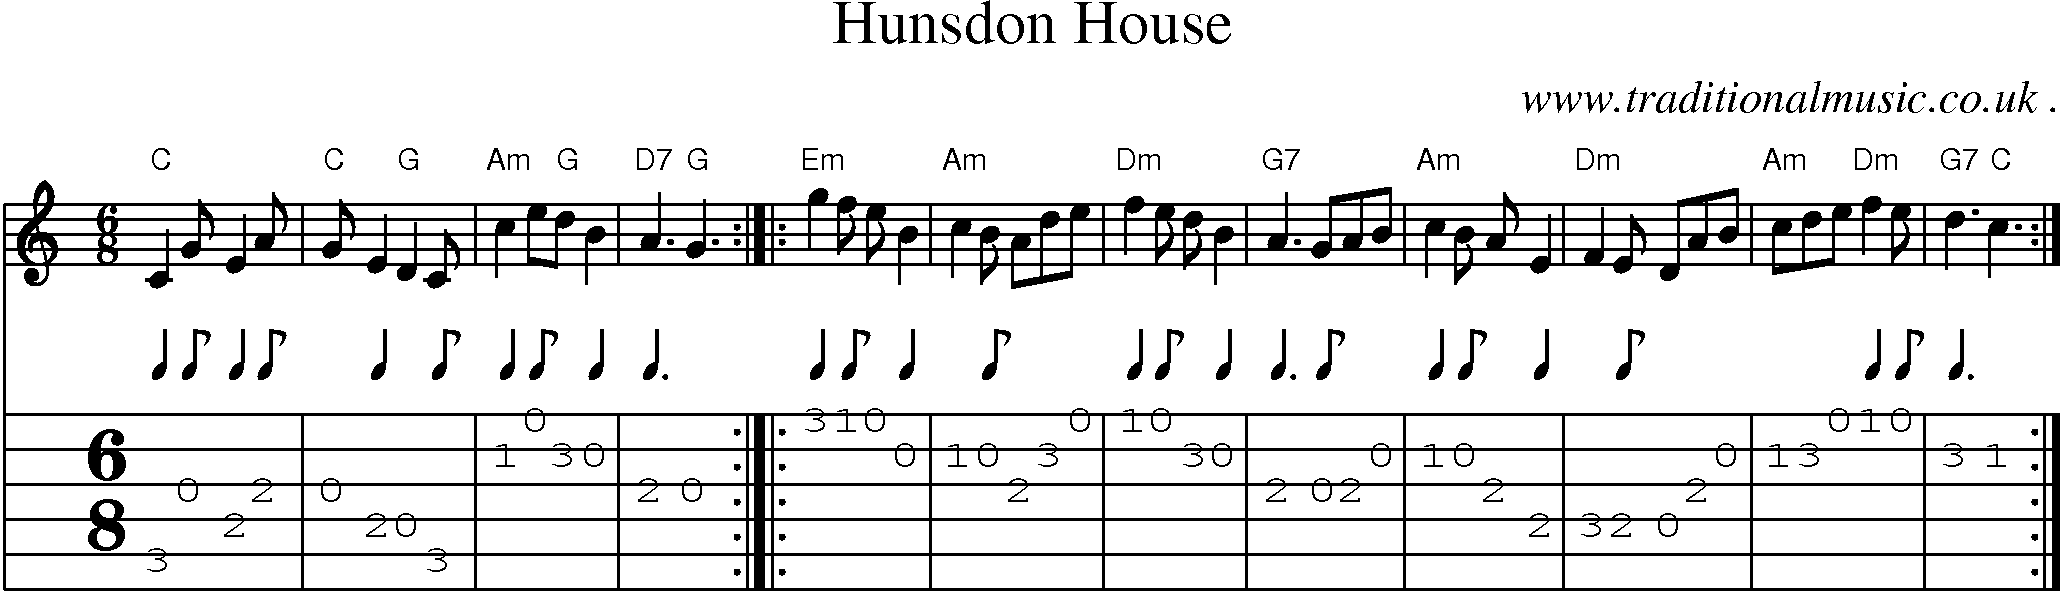 Sheet-Music and Guitar Tabs for Hunsdon House